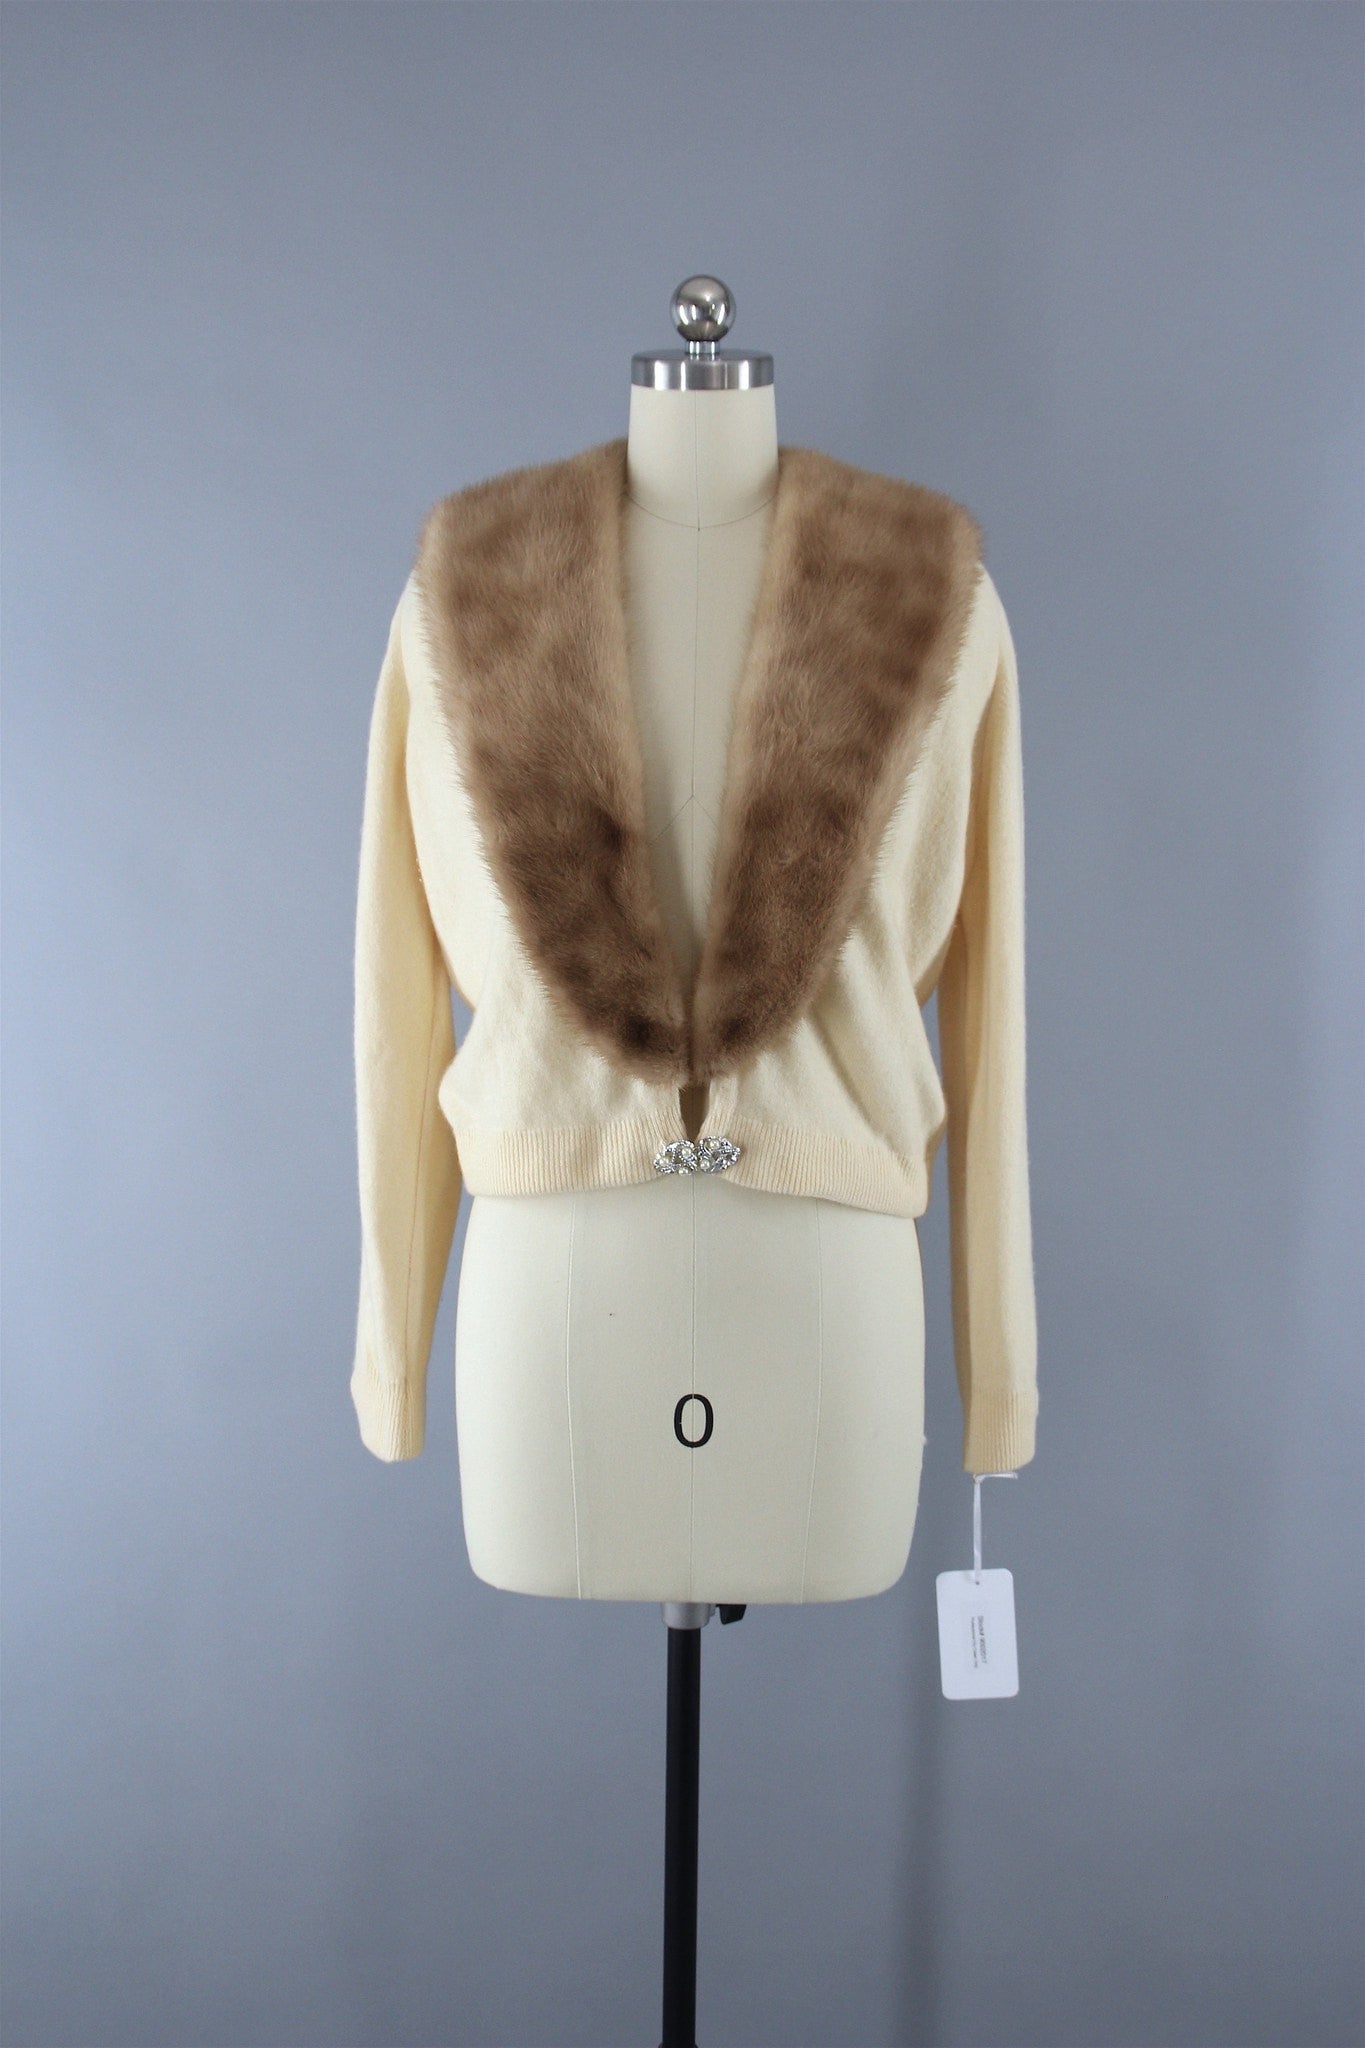 Vintage 1950s Ivory Cashmere Sweater with Fur Collar - ThisBlueBird